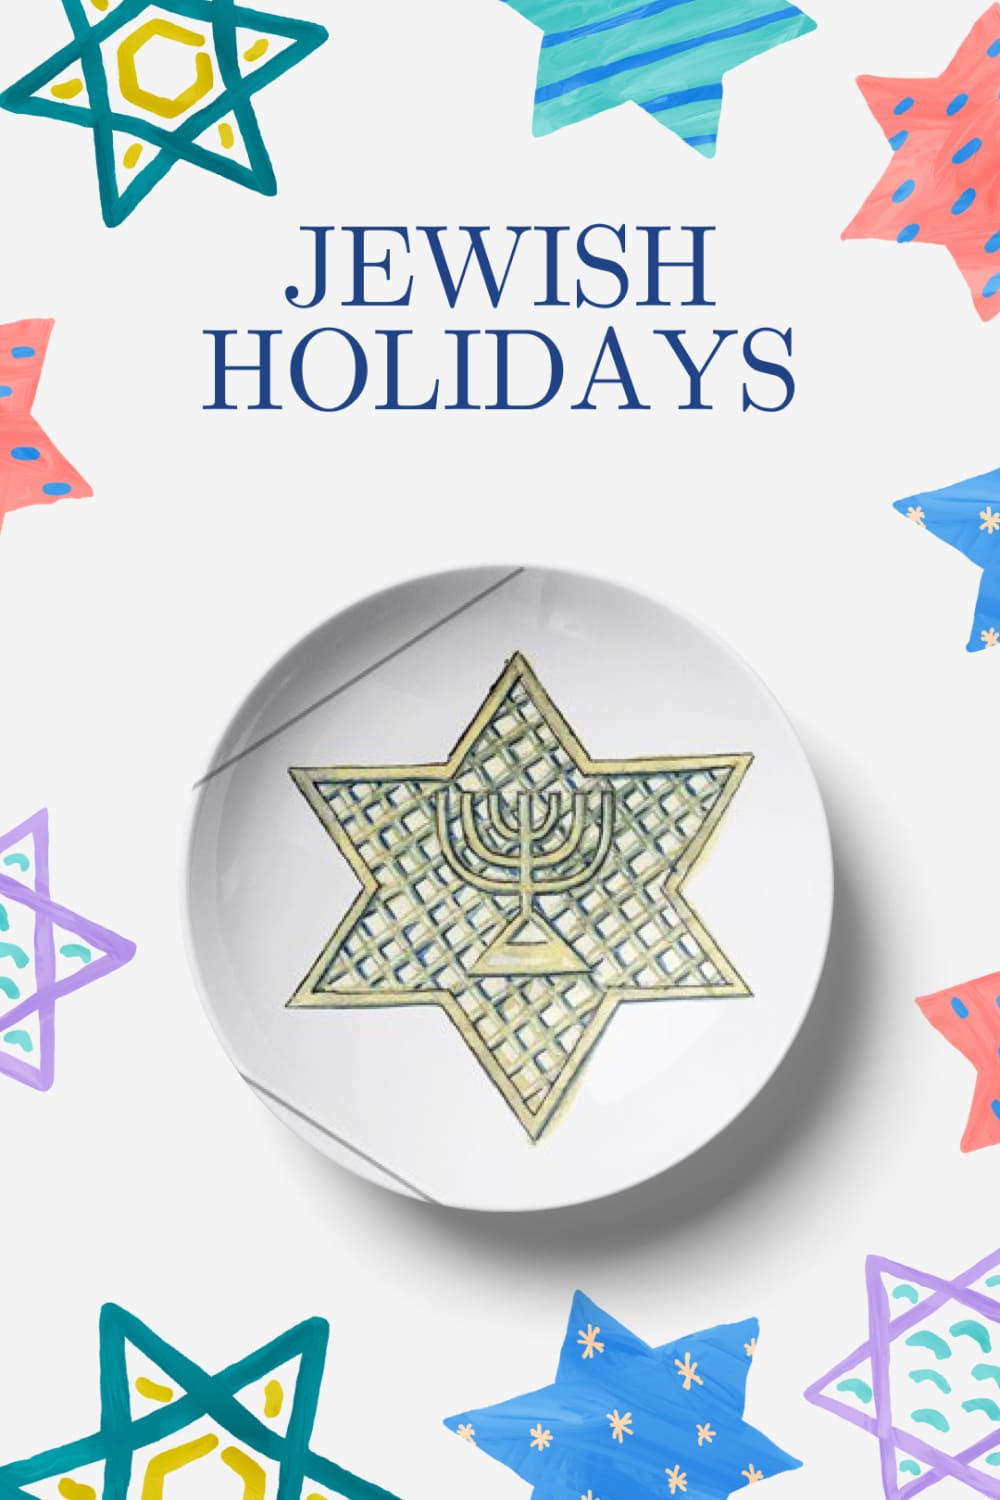 A six-pointed religious star is painted on the plate.